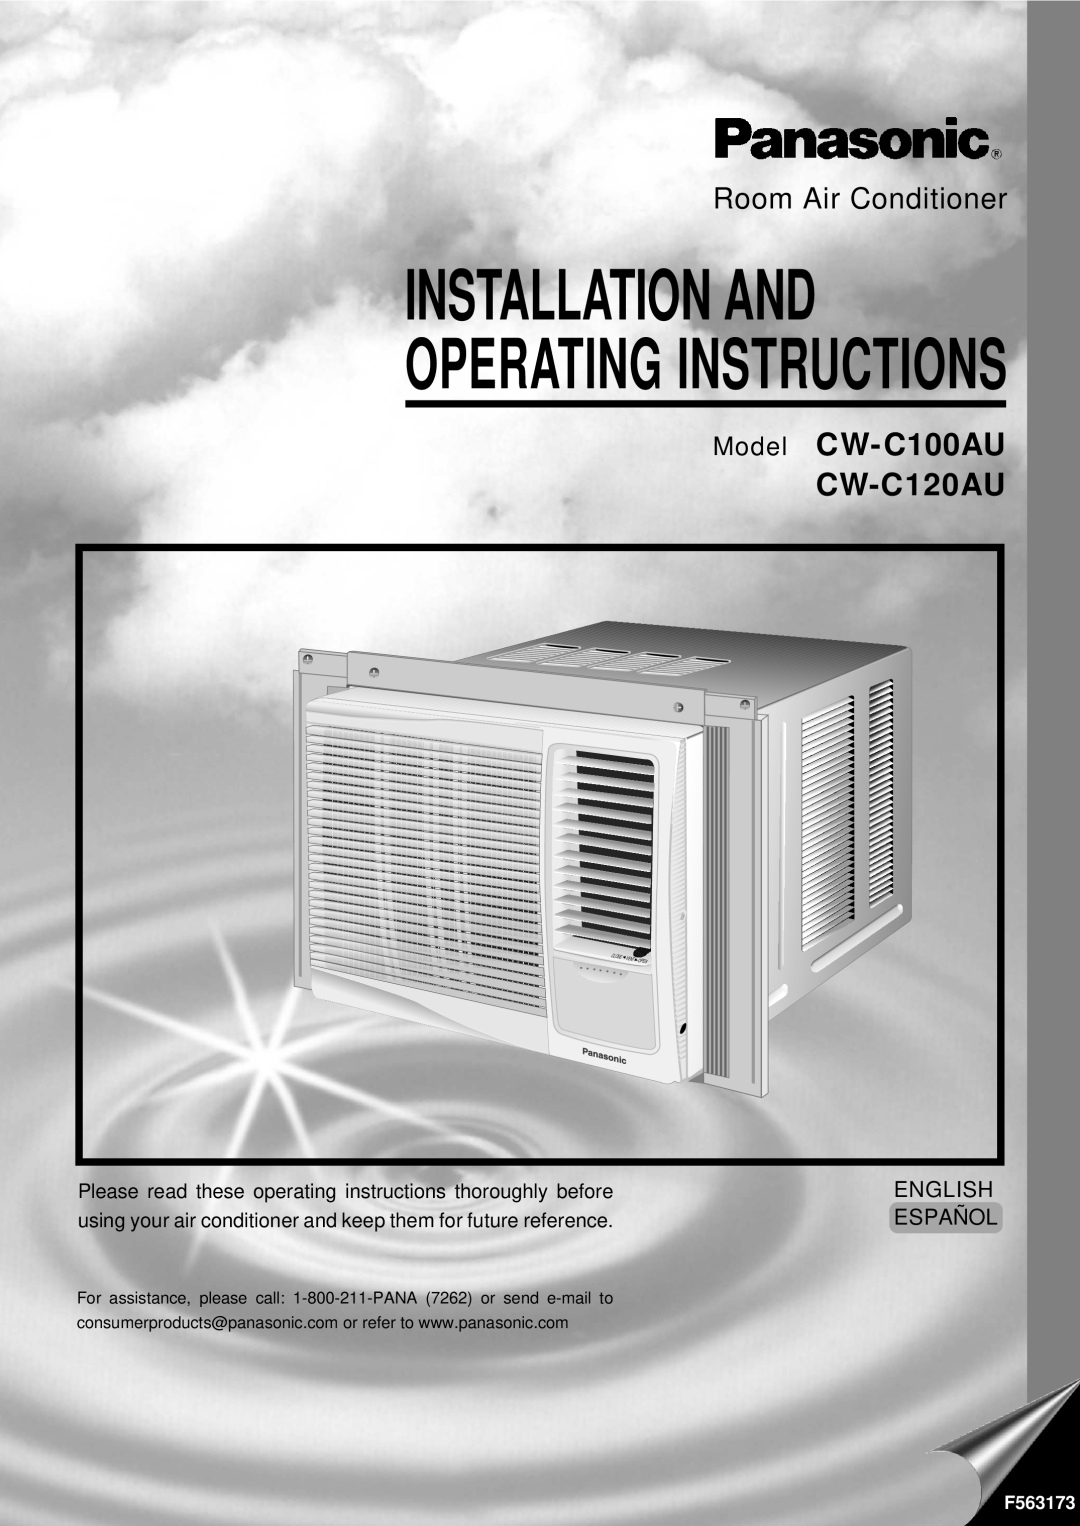 Panasonic manual Installation And, Operating Instructions, Model CW-C100AU, CW-C120AU, Room Air Conditioner, English 